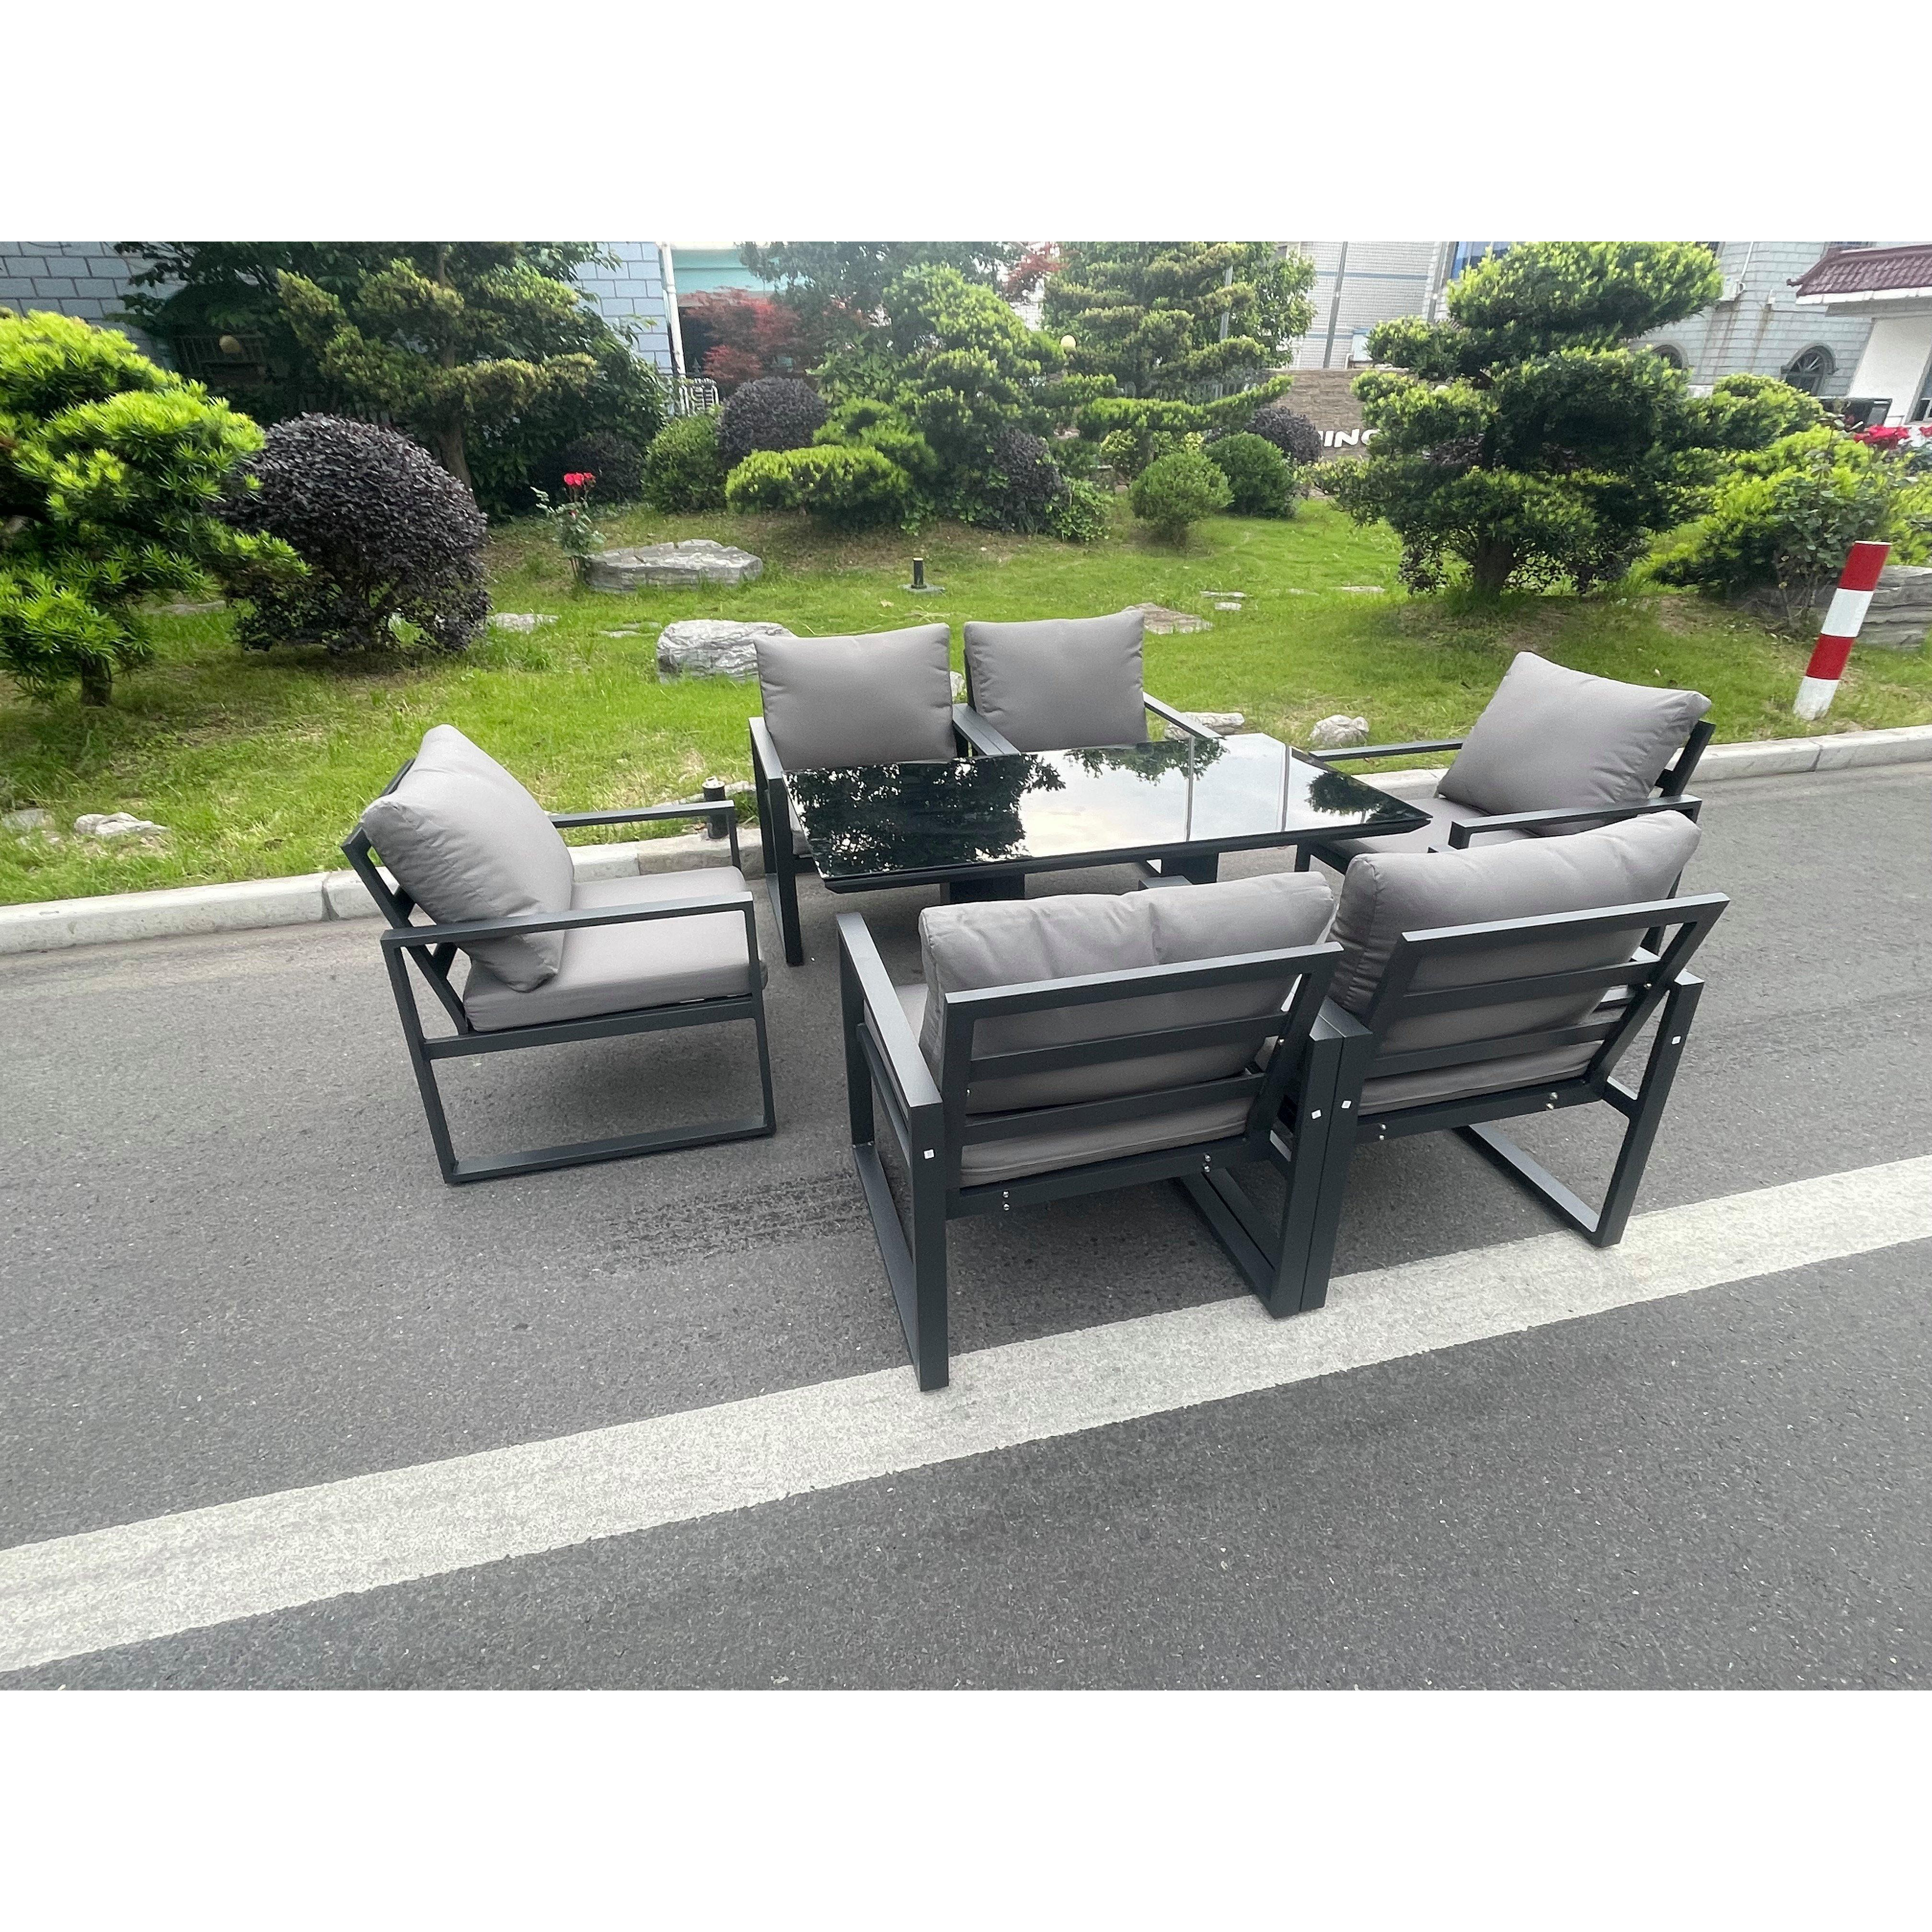 Aluminum Garden Furniture Dining Set Adjustable Rising Lifting Table And Chairs Patio Outdoor 6 Seat Black Tempered Glass Dark Grey - image 1